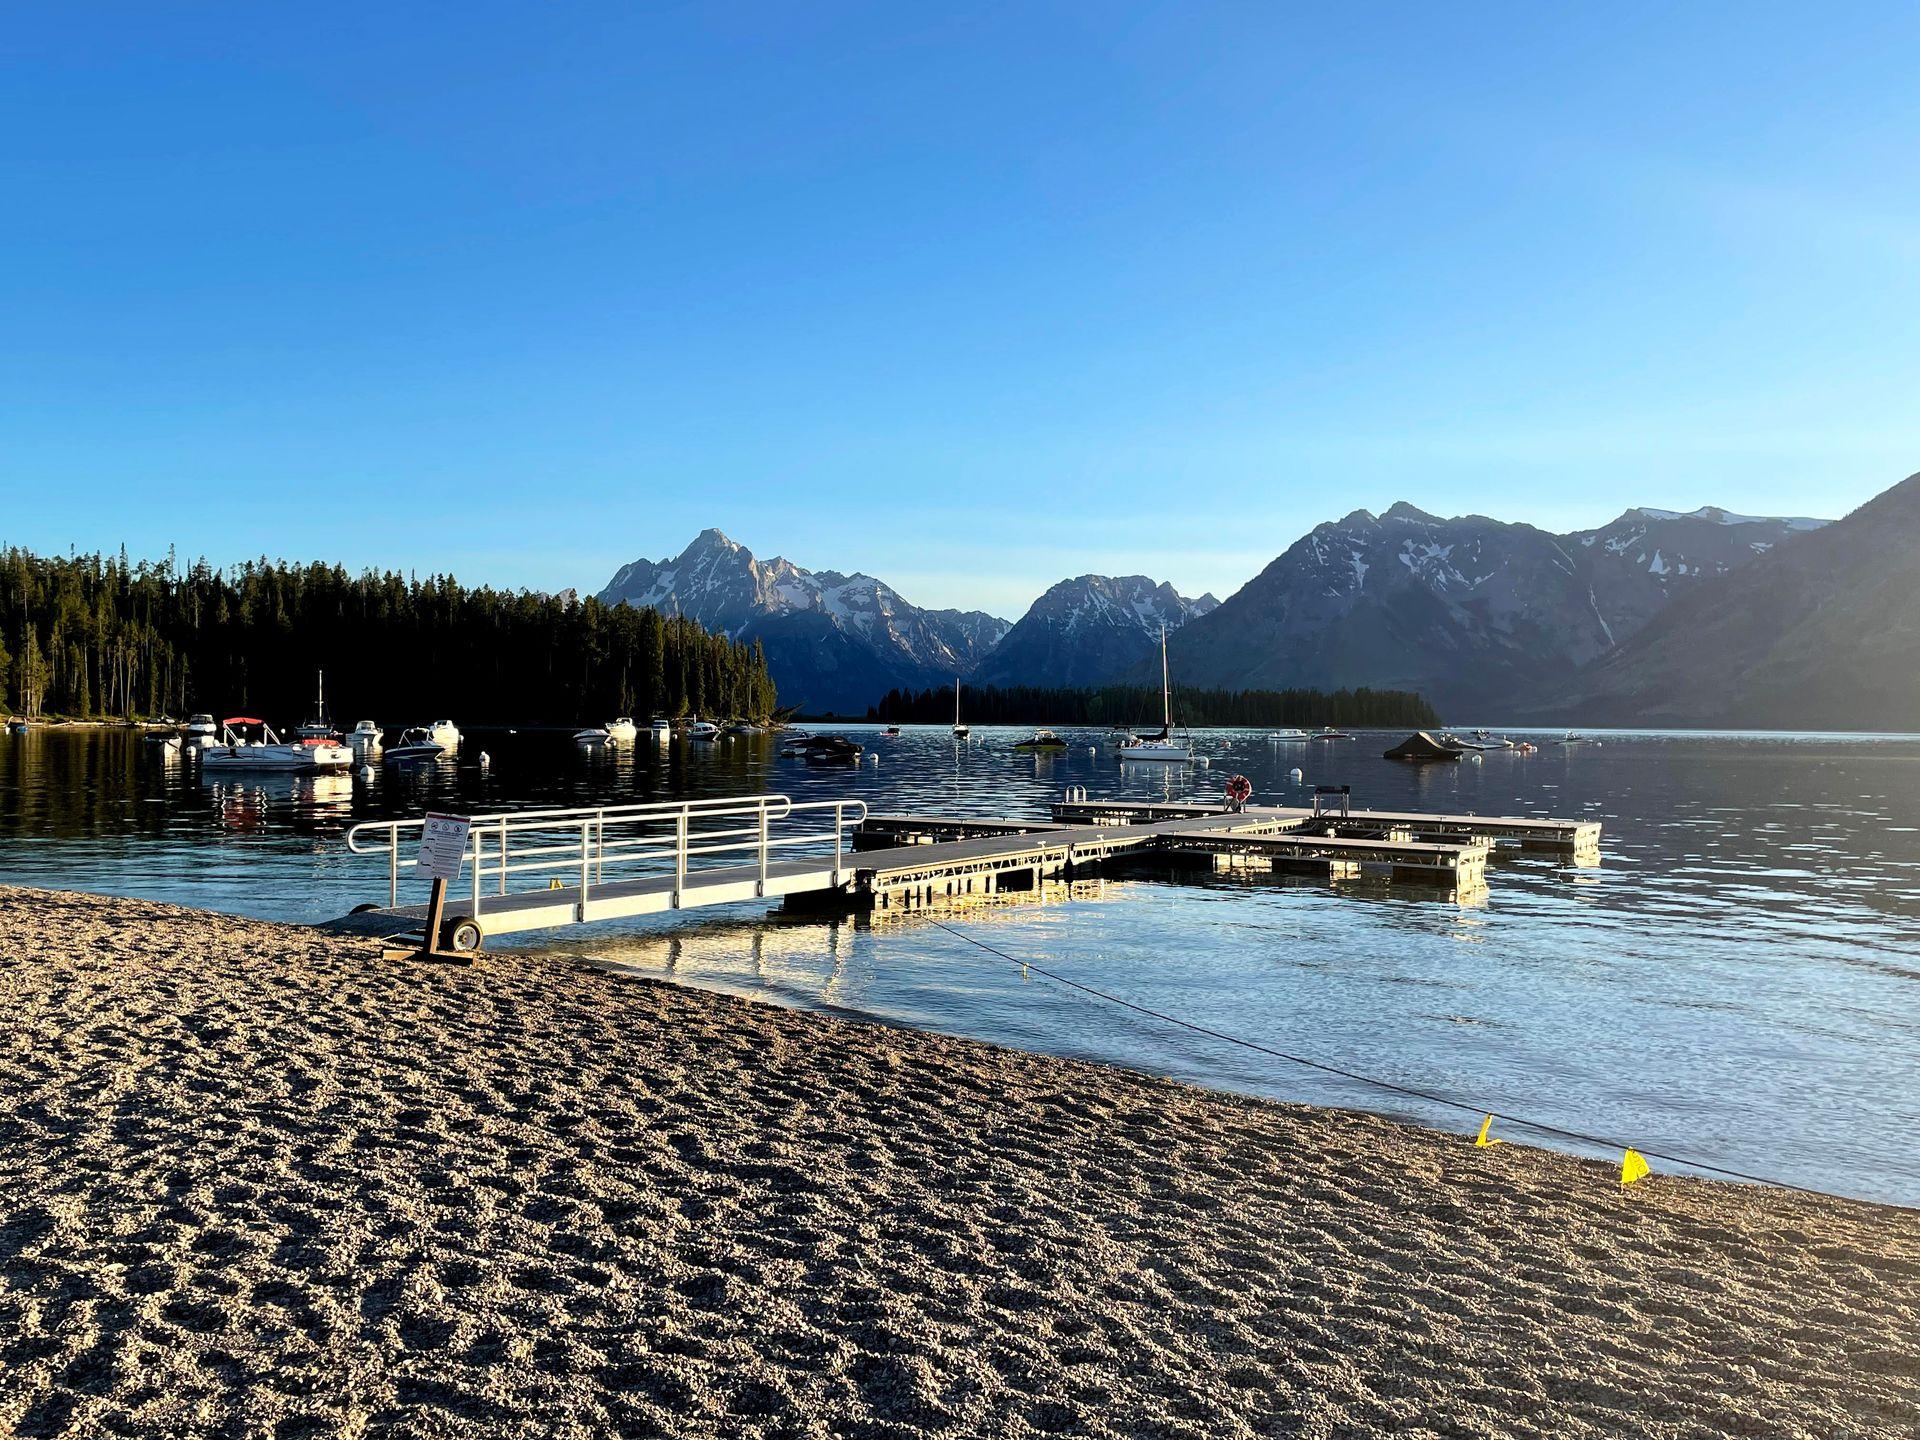 A dock extending out from a beach on Colter Bay Beach. There are several boats near the water.